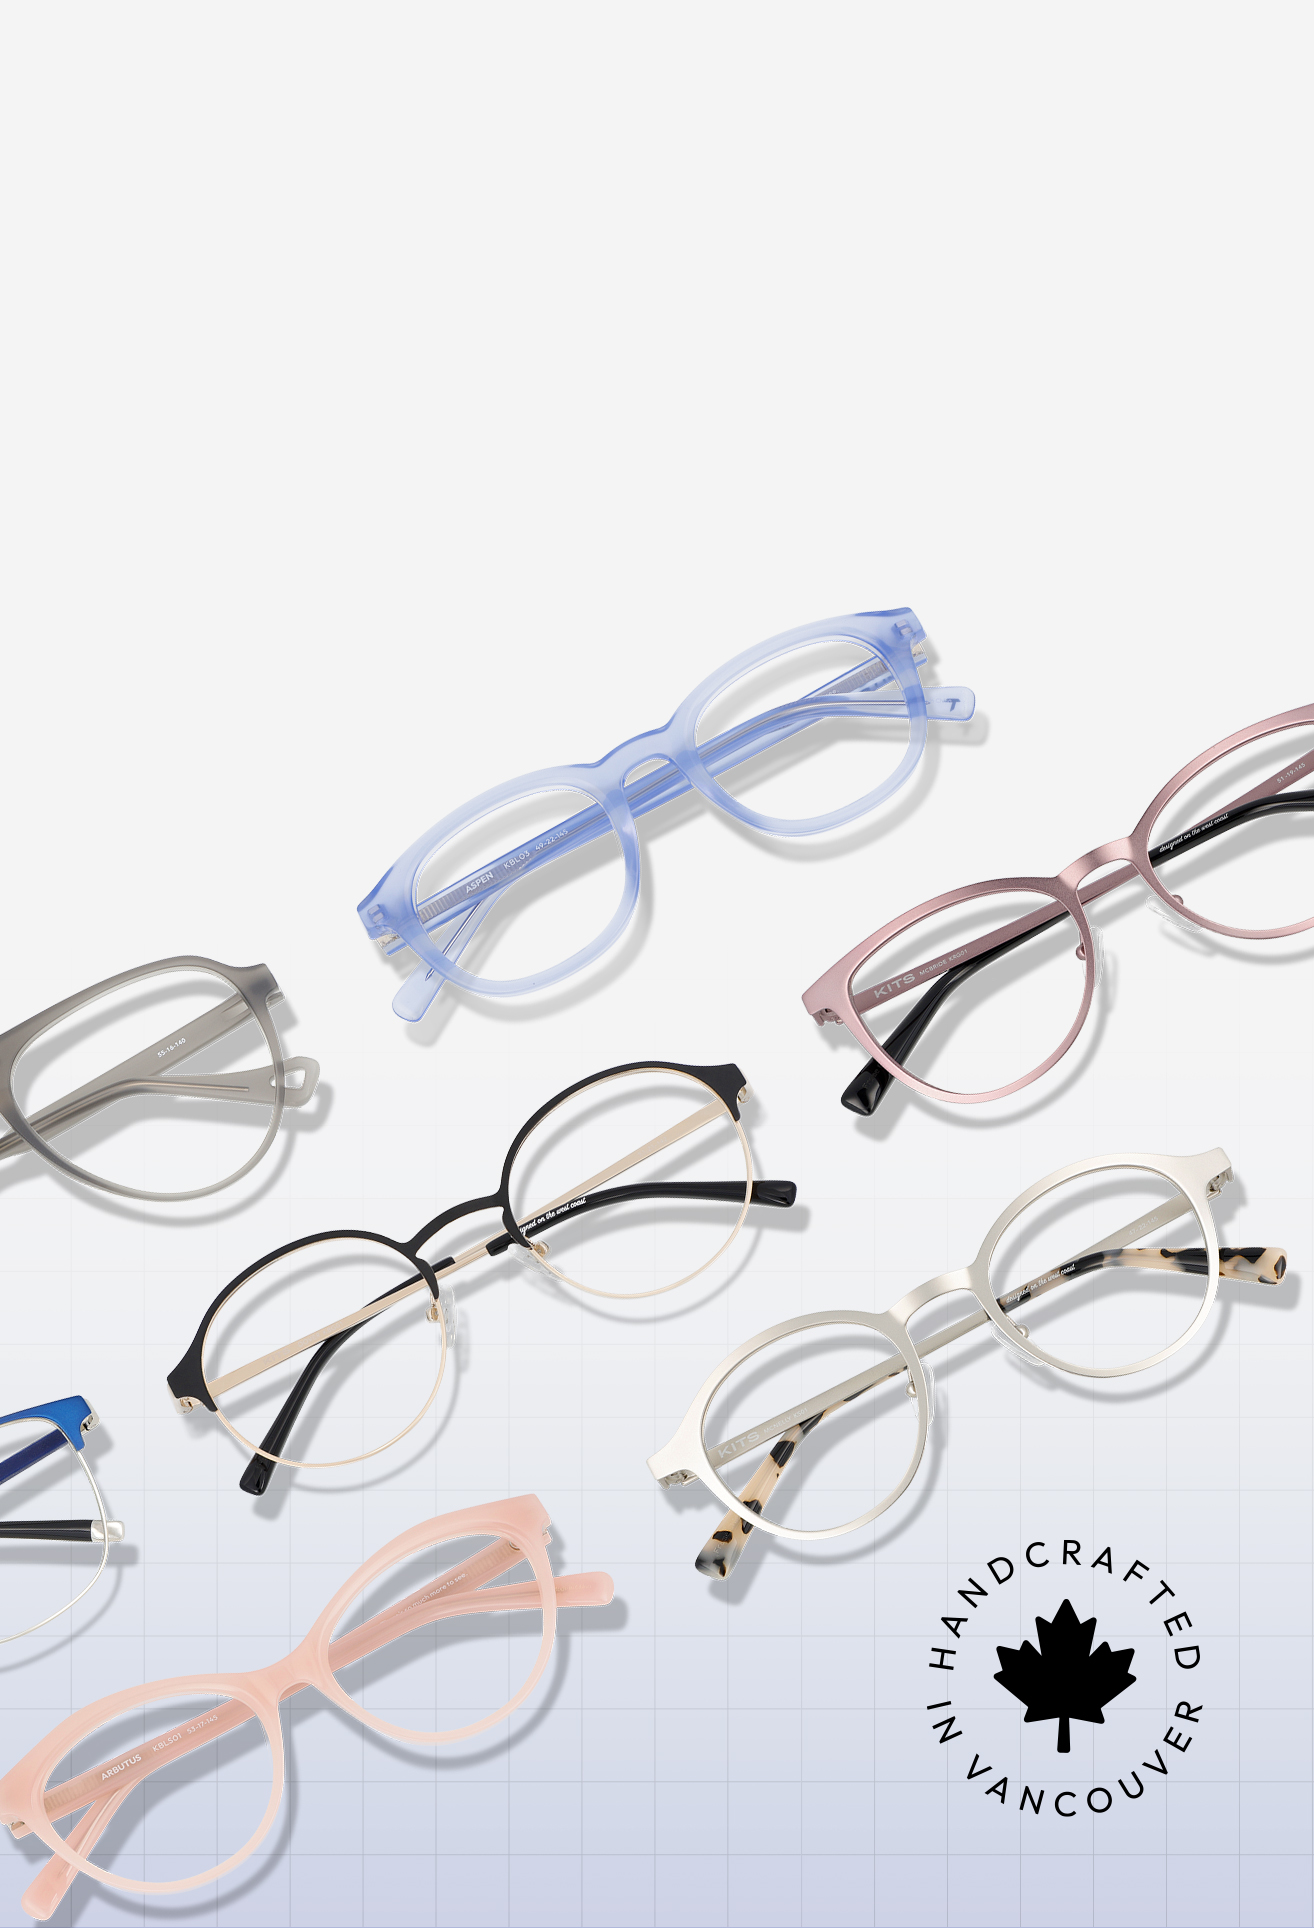 ALL KITS GLASSES ARE $28